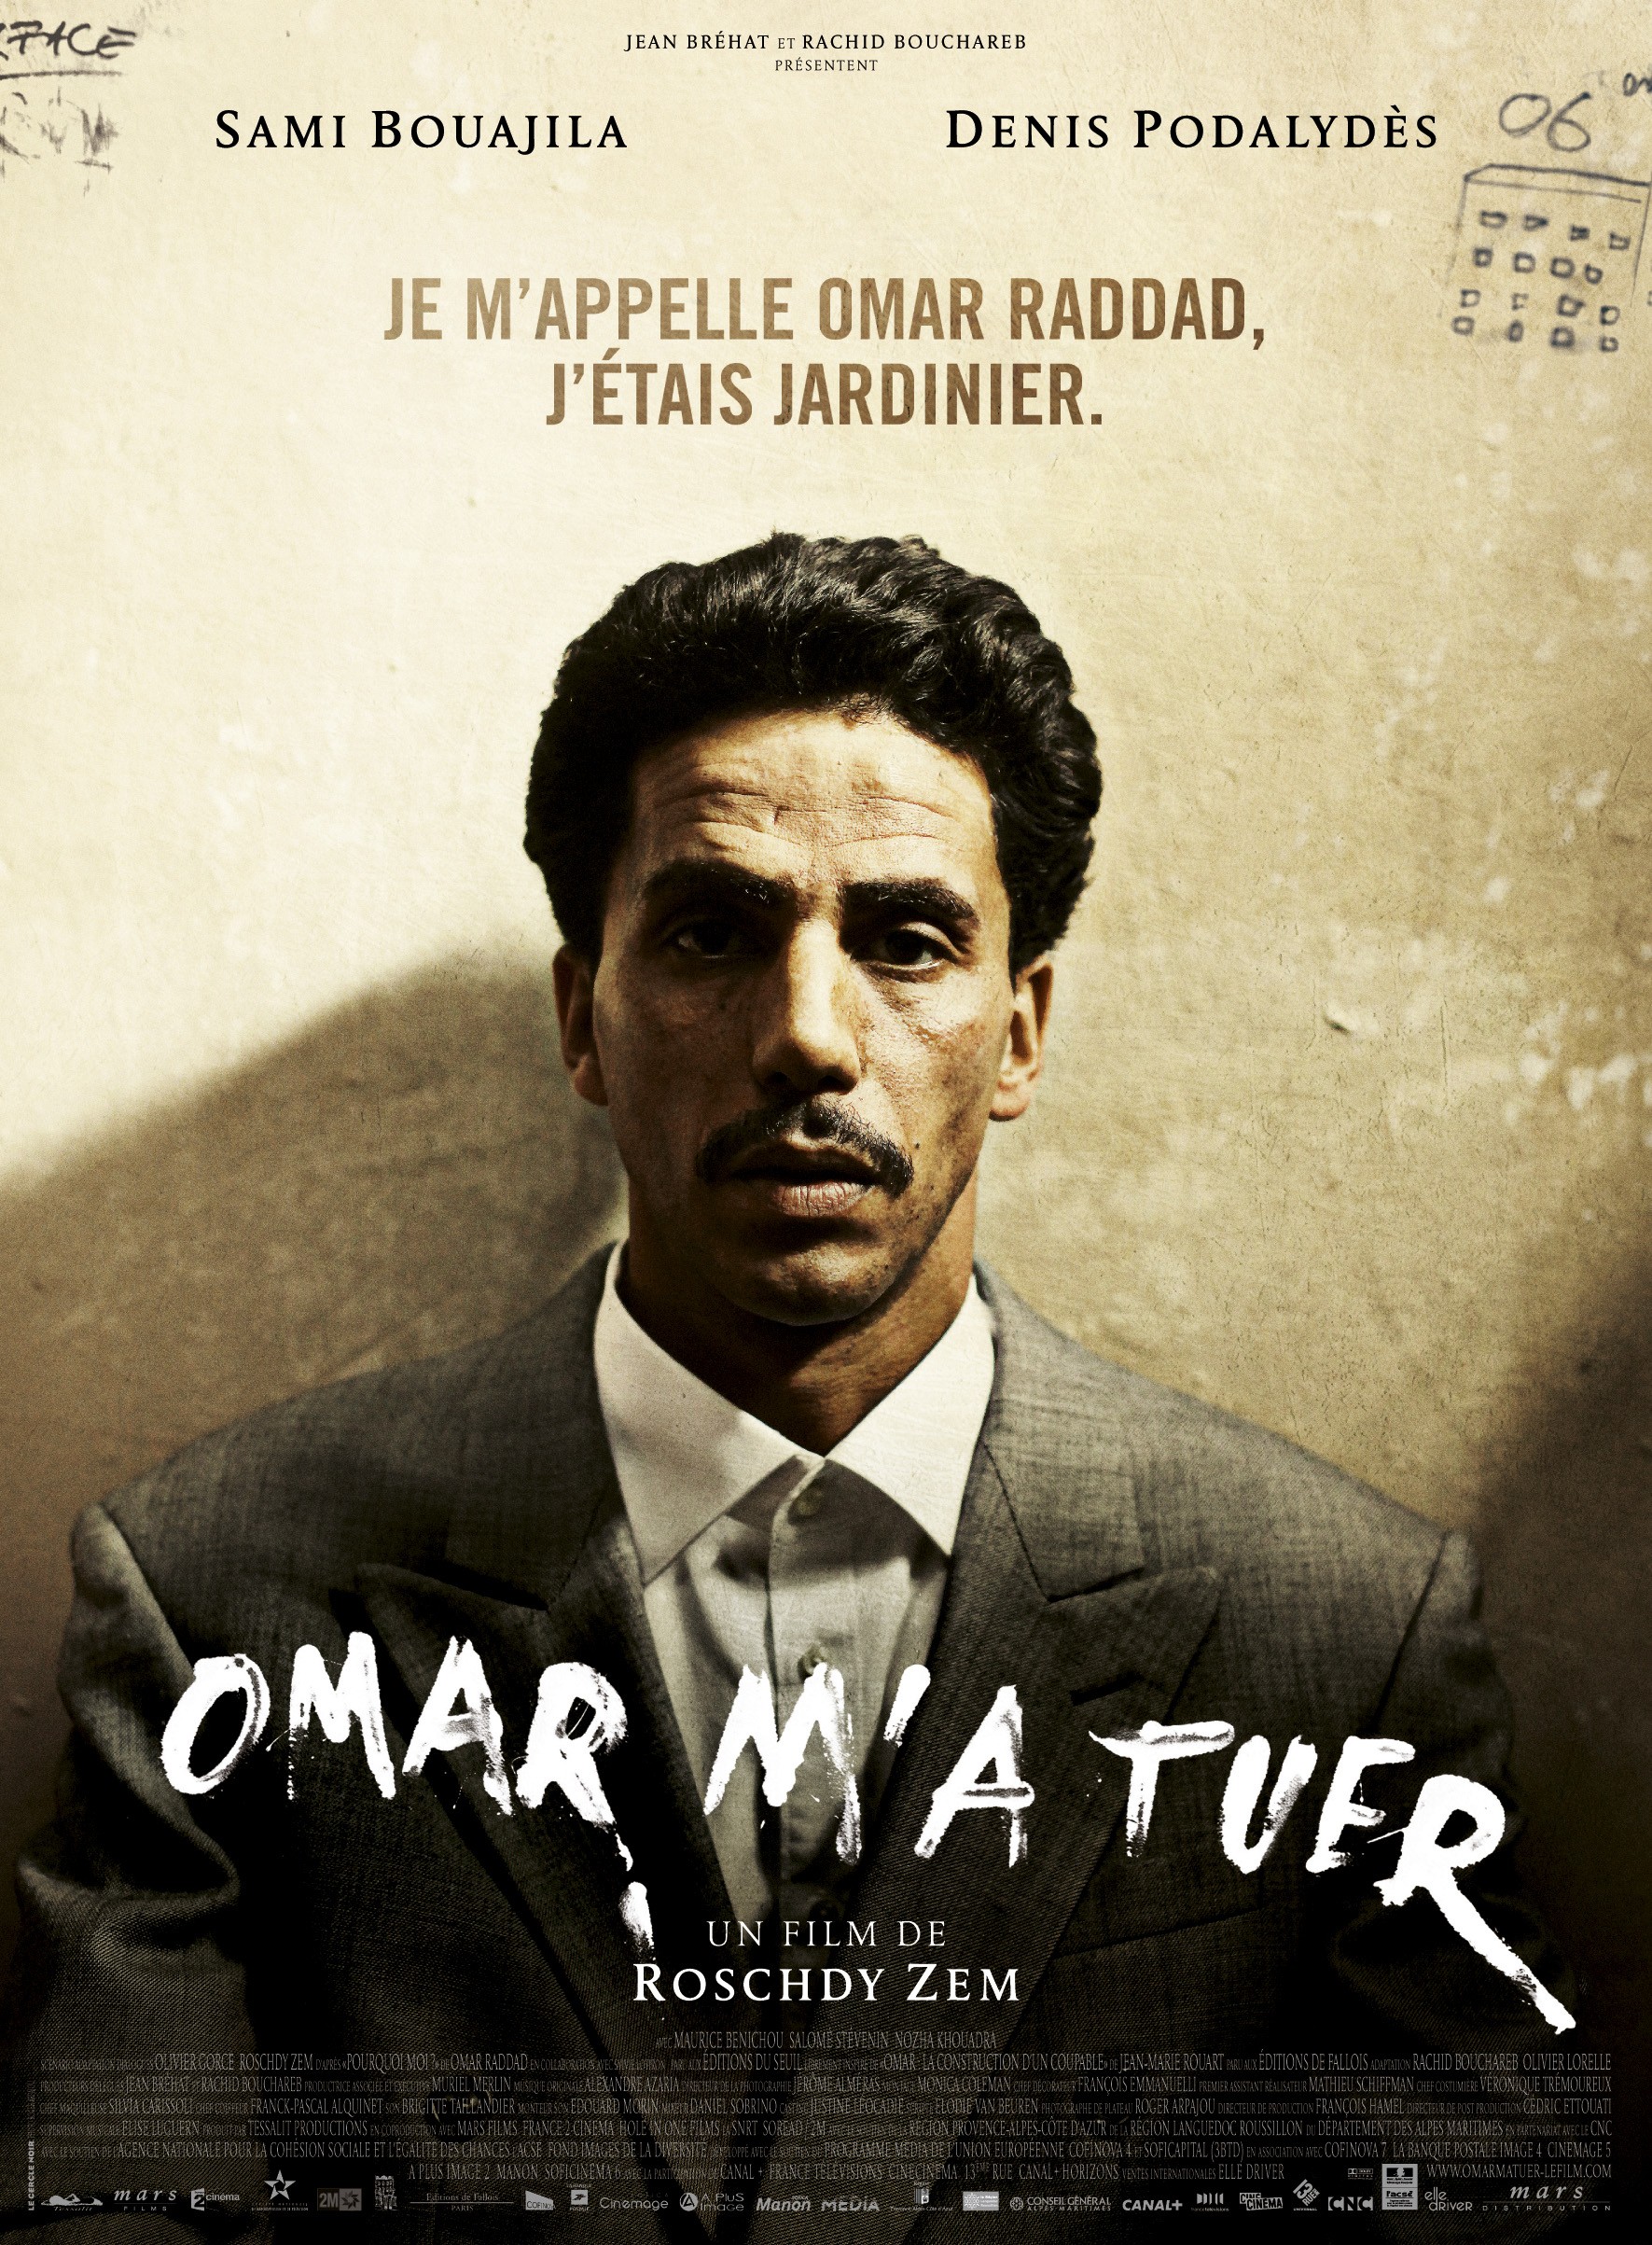 Mega Sized Movie Poster Image for Omar m'a tuer (#2 of 2)